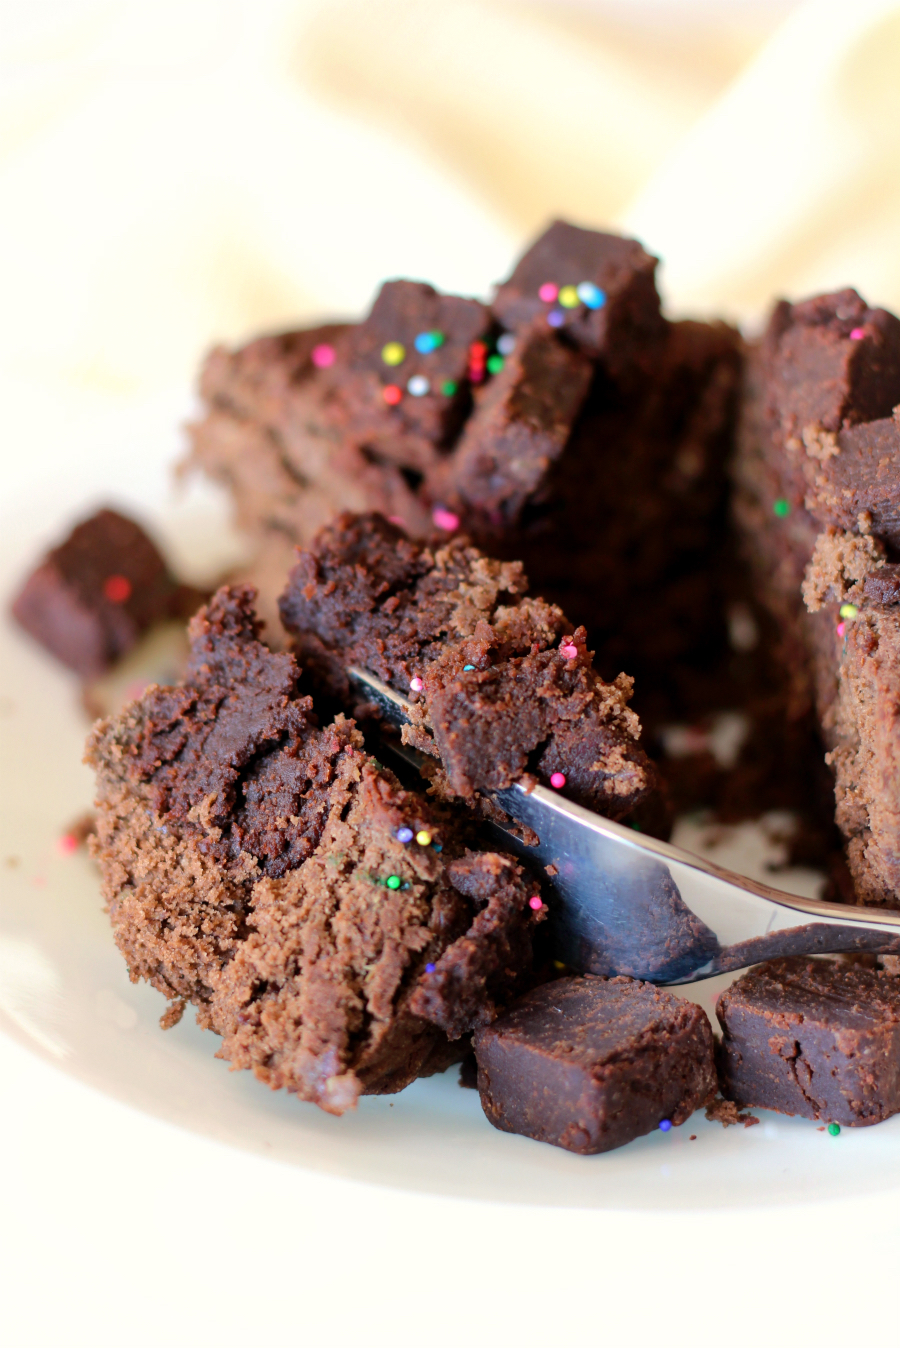 Double Stuffed Gluten-Free Mug Brownie (Allergy-Free, Vegan) | Strength and Sunshine @RebeccaGF666 No one has to miss out on delicious treats! This Double Stuffed Gluten-Free Mug Brownie dessert is allergy-free, vegan, and made right in the microwave in just a minute! A perfect size to share with a friend or eat the whole recipe yourself!